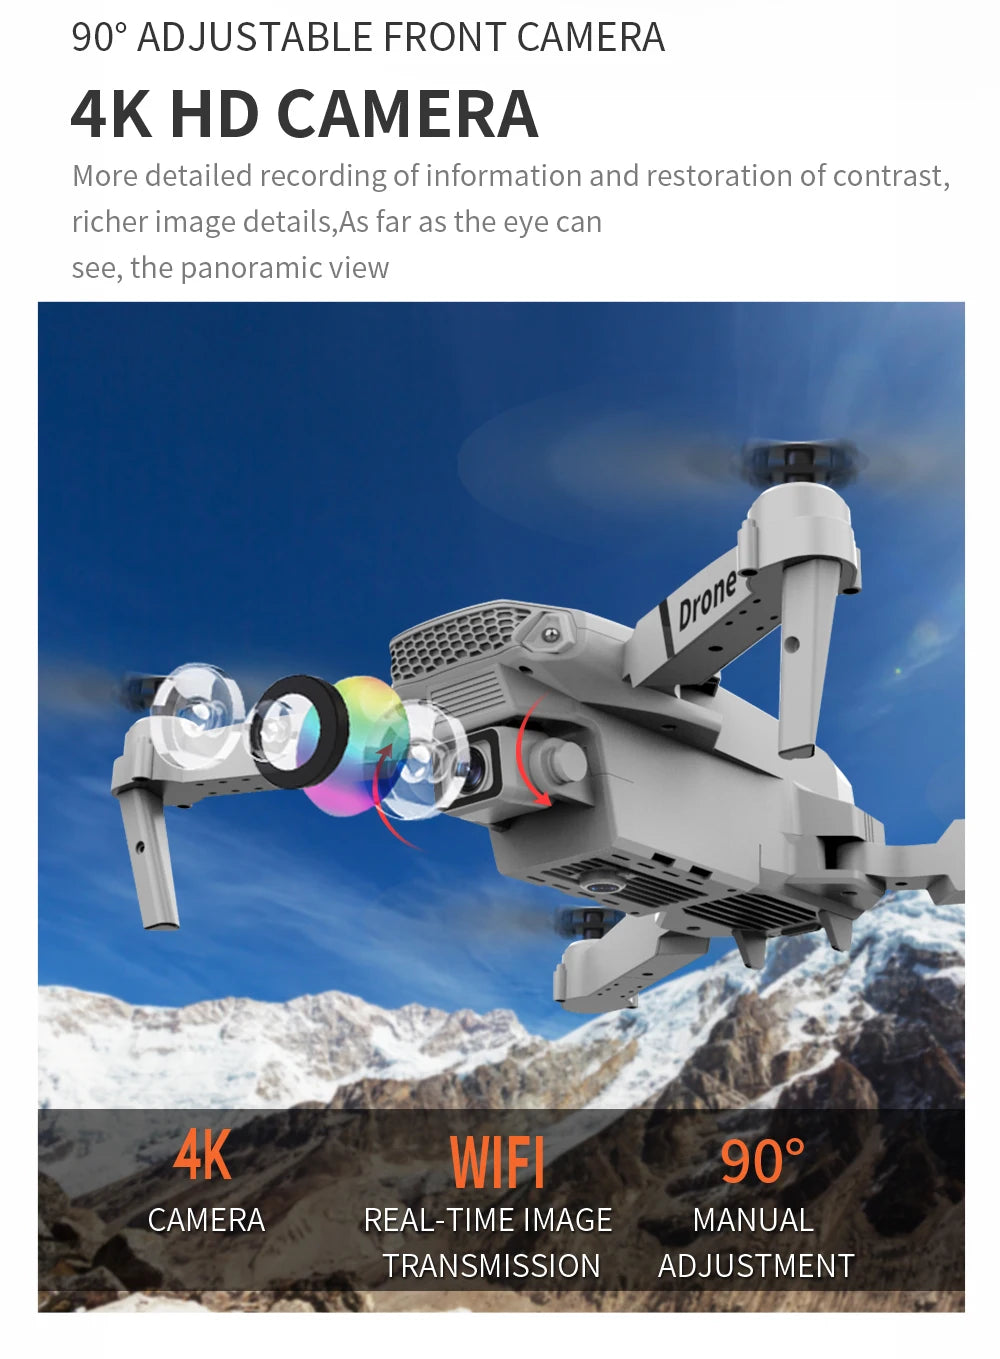 4 UHD Aerial Photography Drone - Remote Control, App Features, Ready-to-Fly